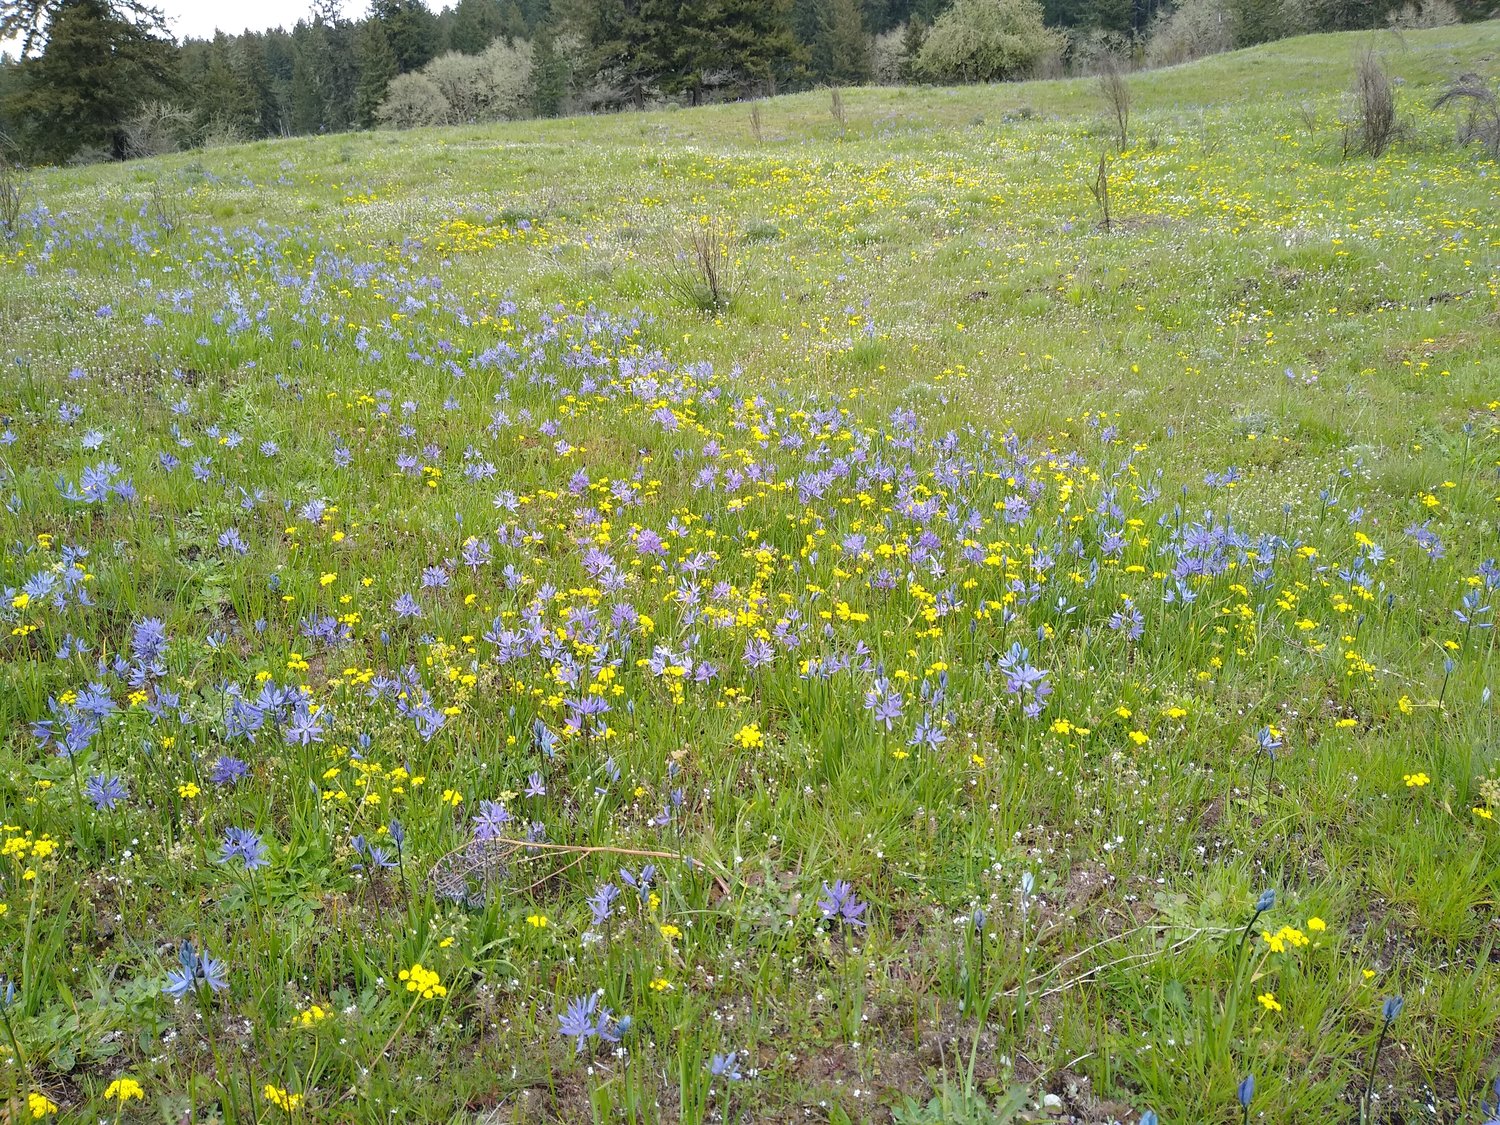 The wildflower bloom on this south Thurston County prairie, taken on May 1, 2022, is ideal feeding and nesting habitat for several species of birds.